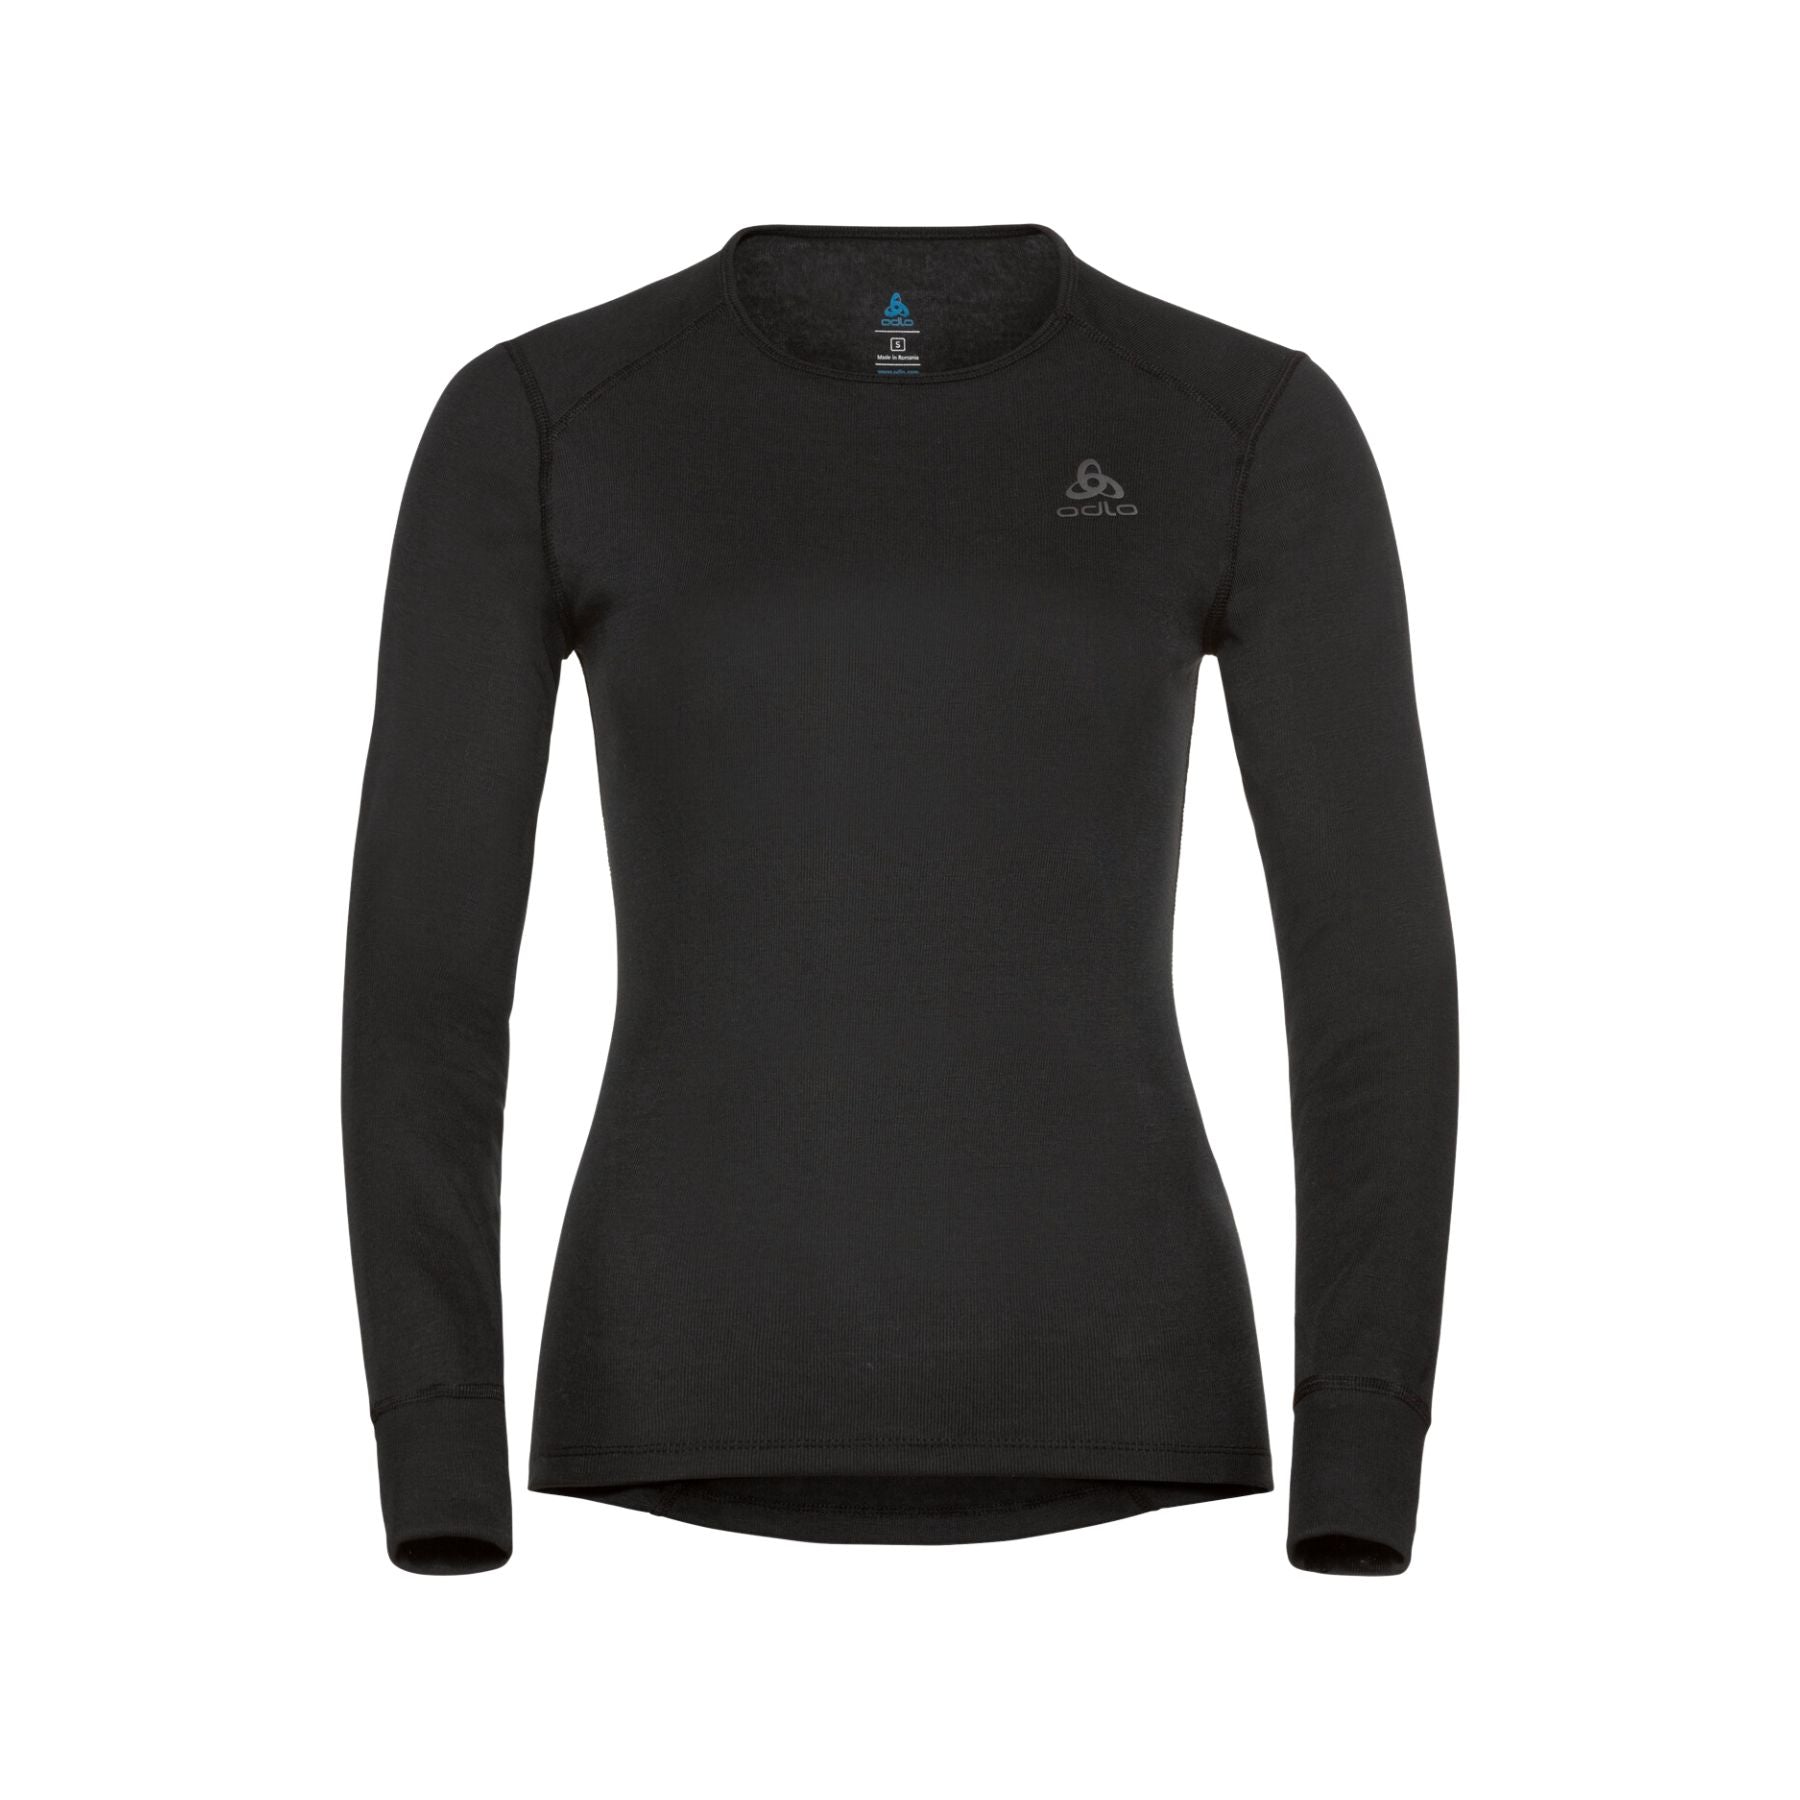 Odlo Women's Active Warm base layer top in Black